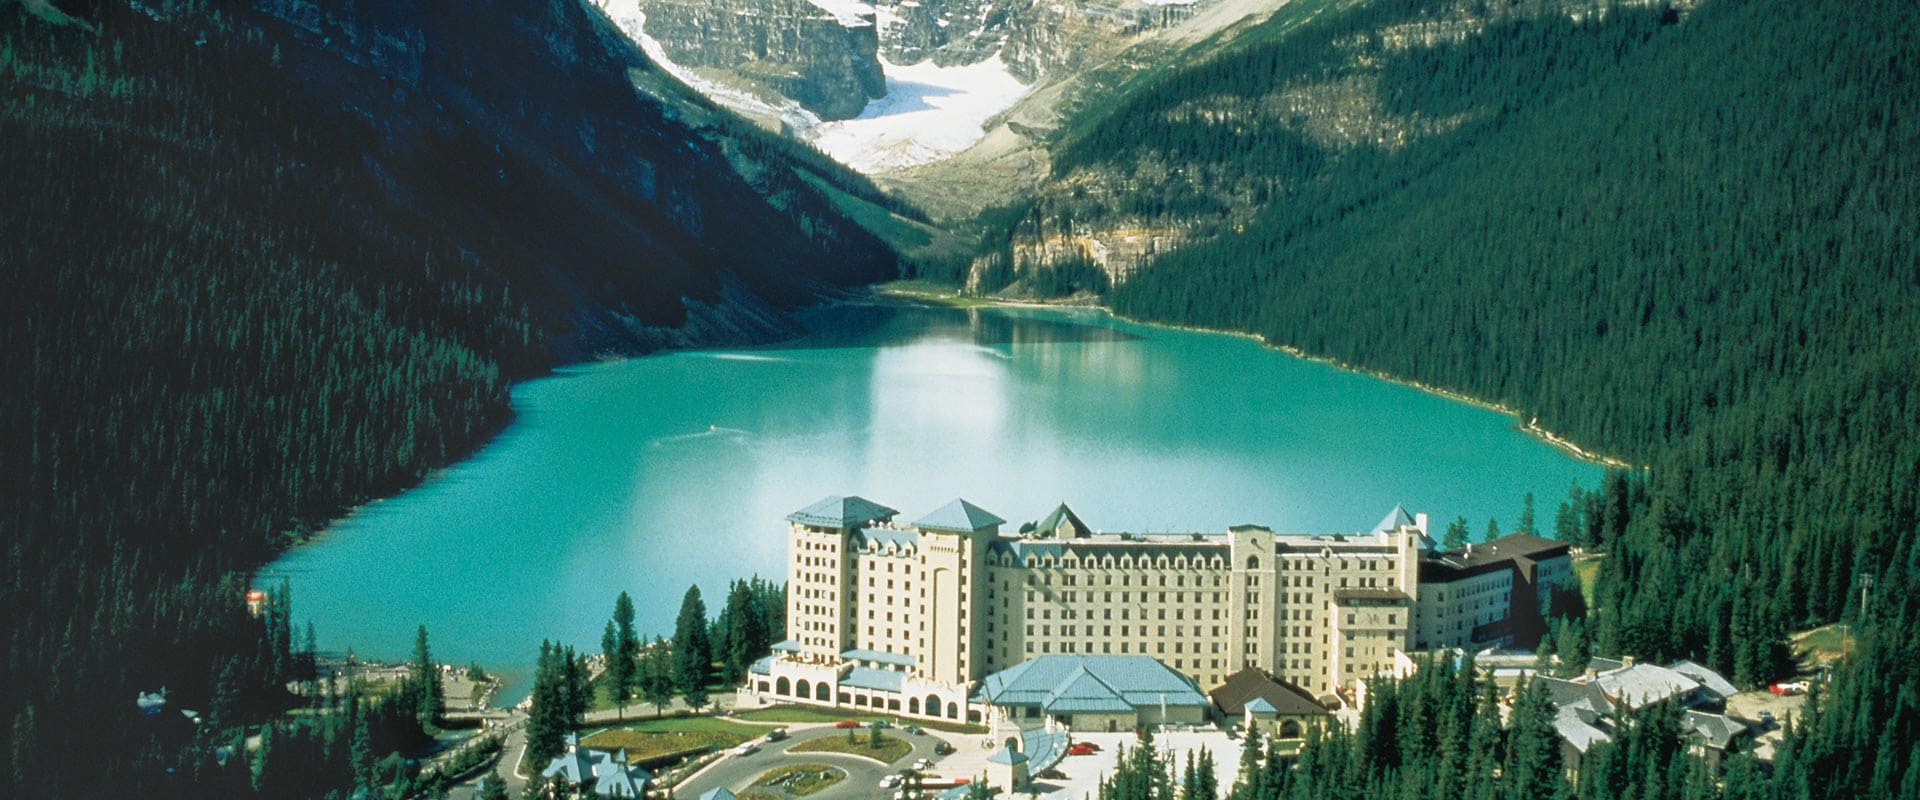 View of Fairmont Chateau Lake Louise in foreground, Canada